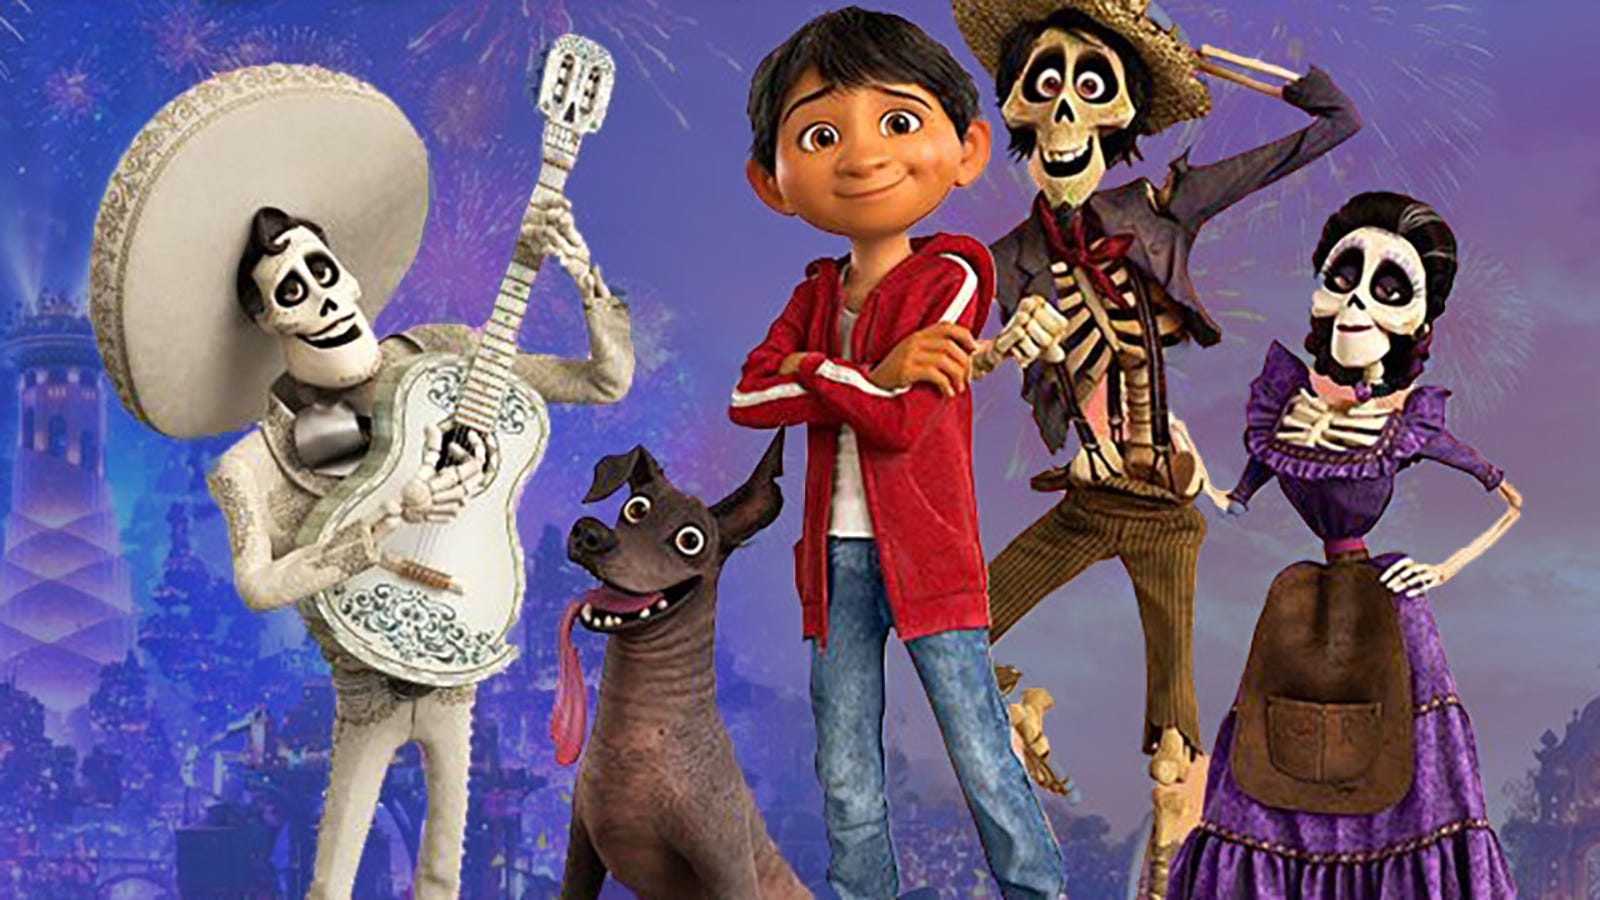 Four Lessons on Age and Wisdom from Disney's Coco, by Raphael Madrid